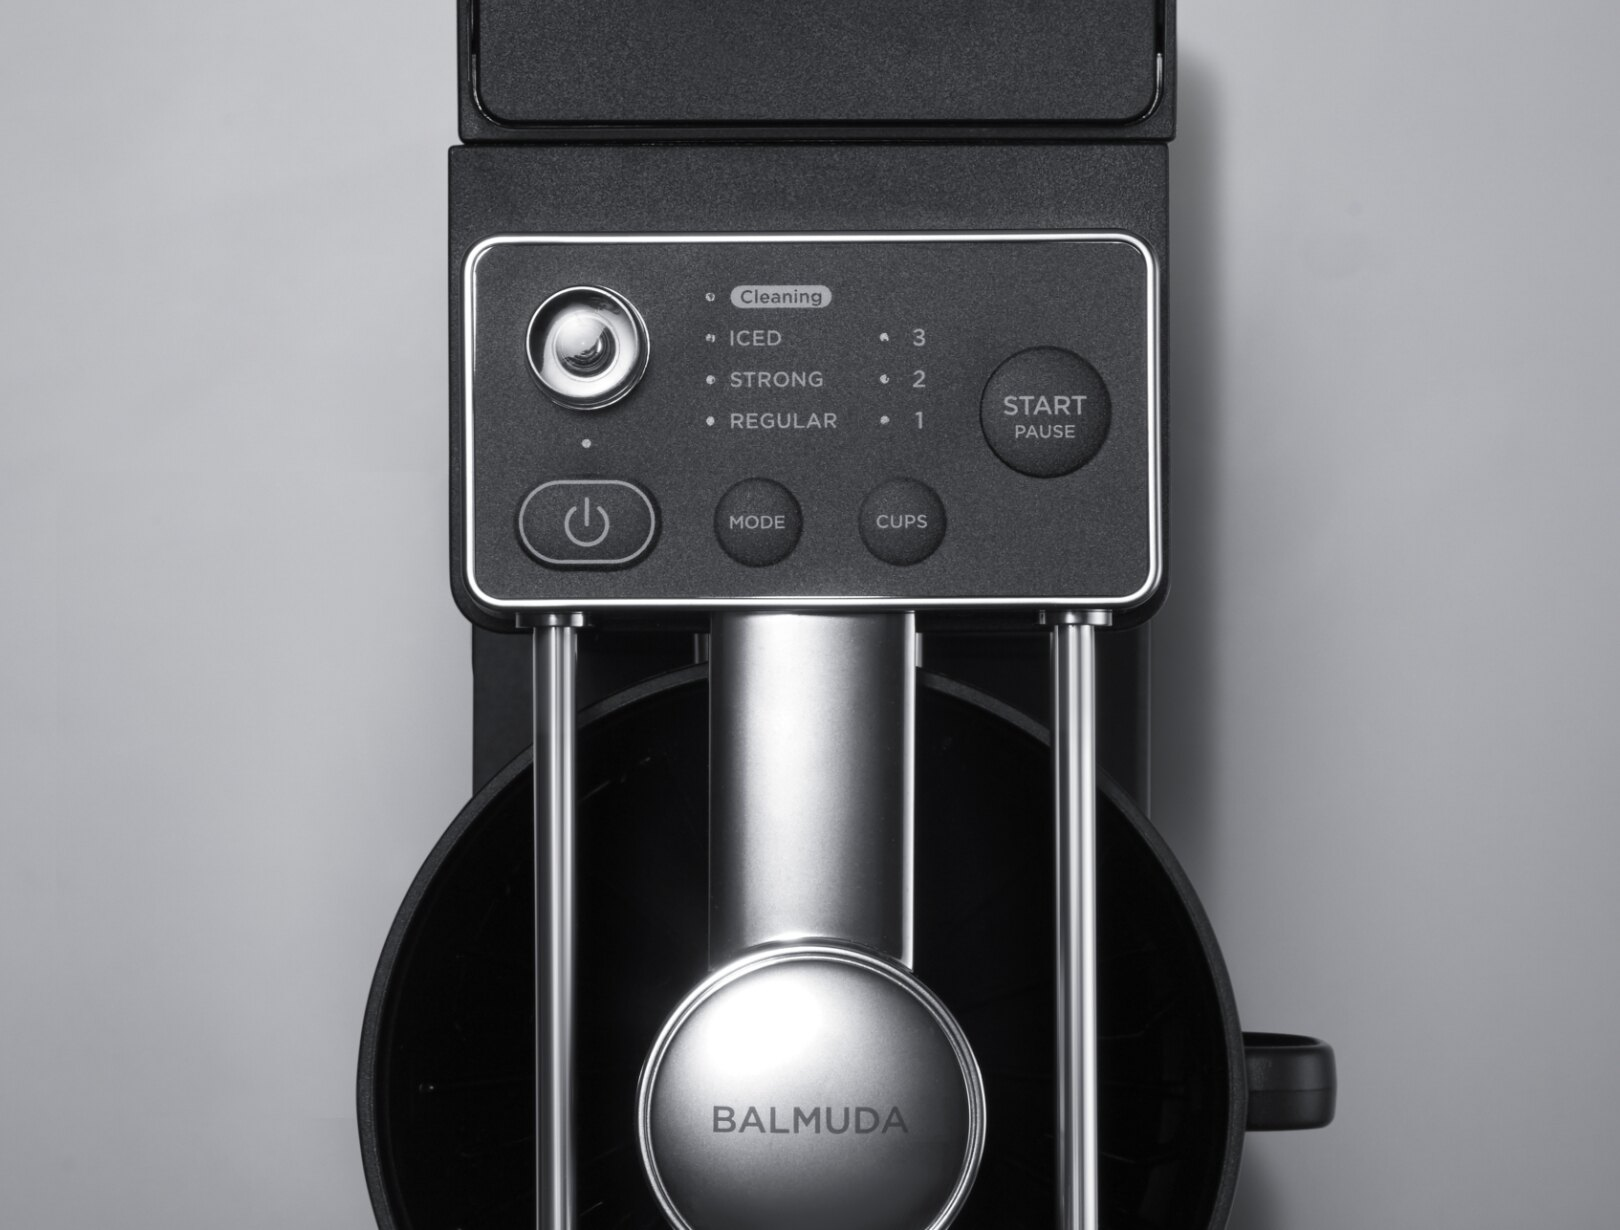 BALMUDA The brew : PRODUCT & PACKAGE